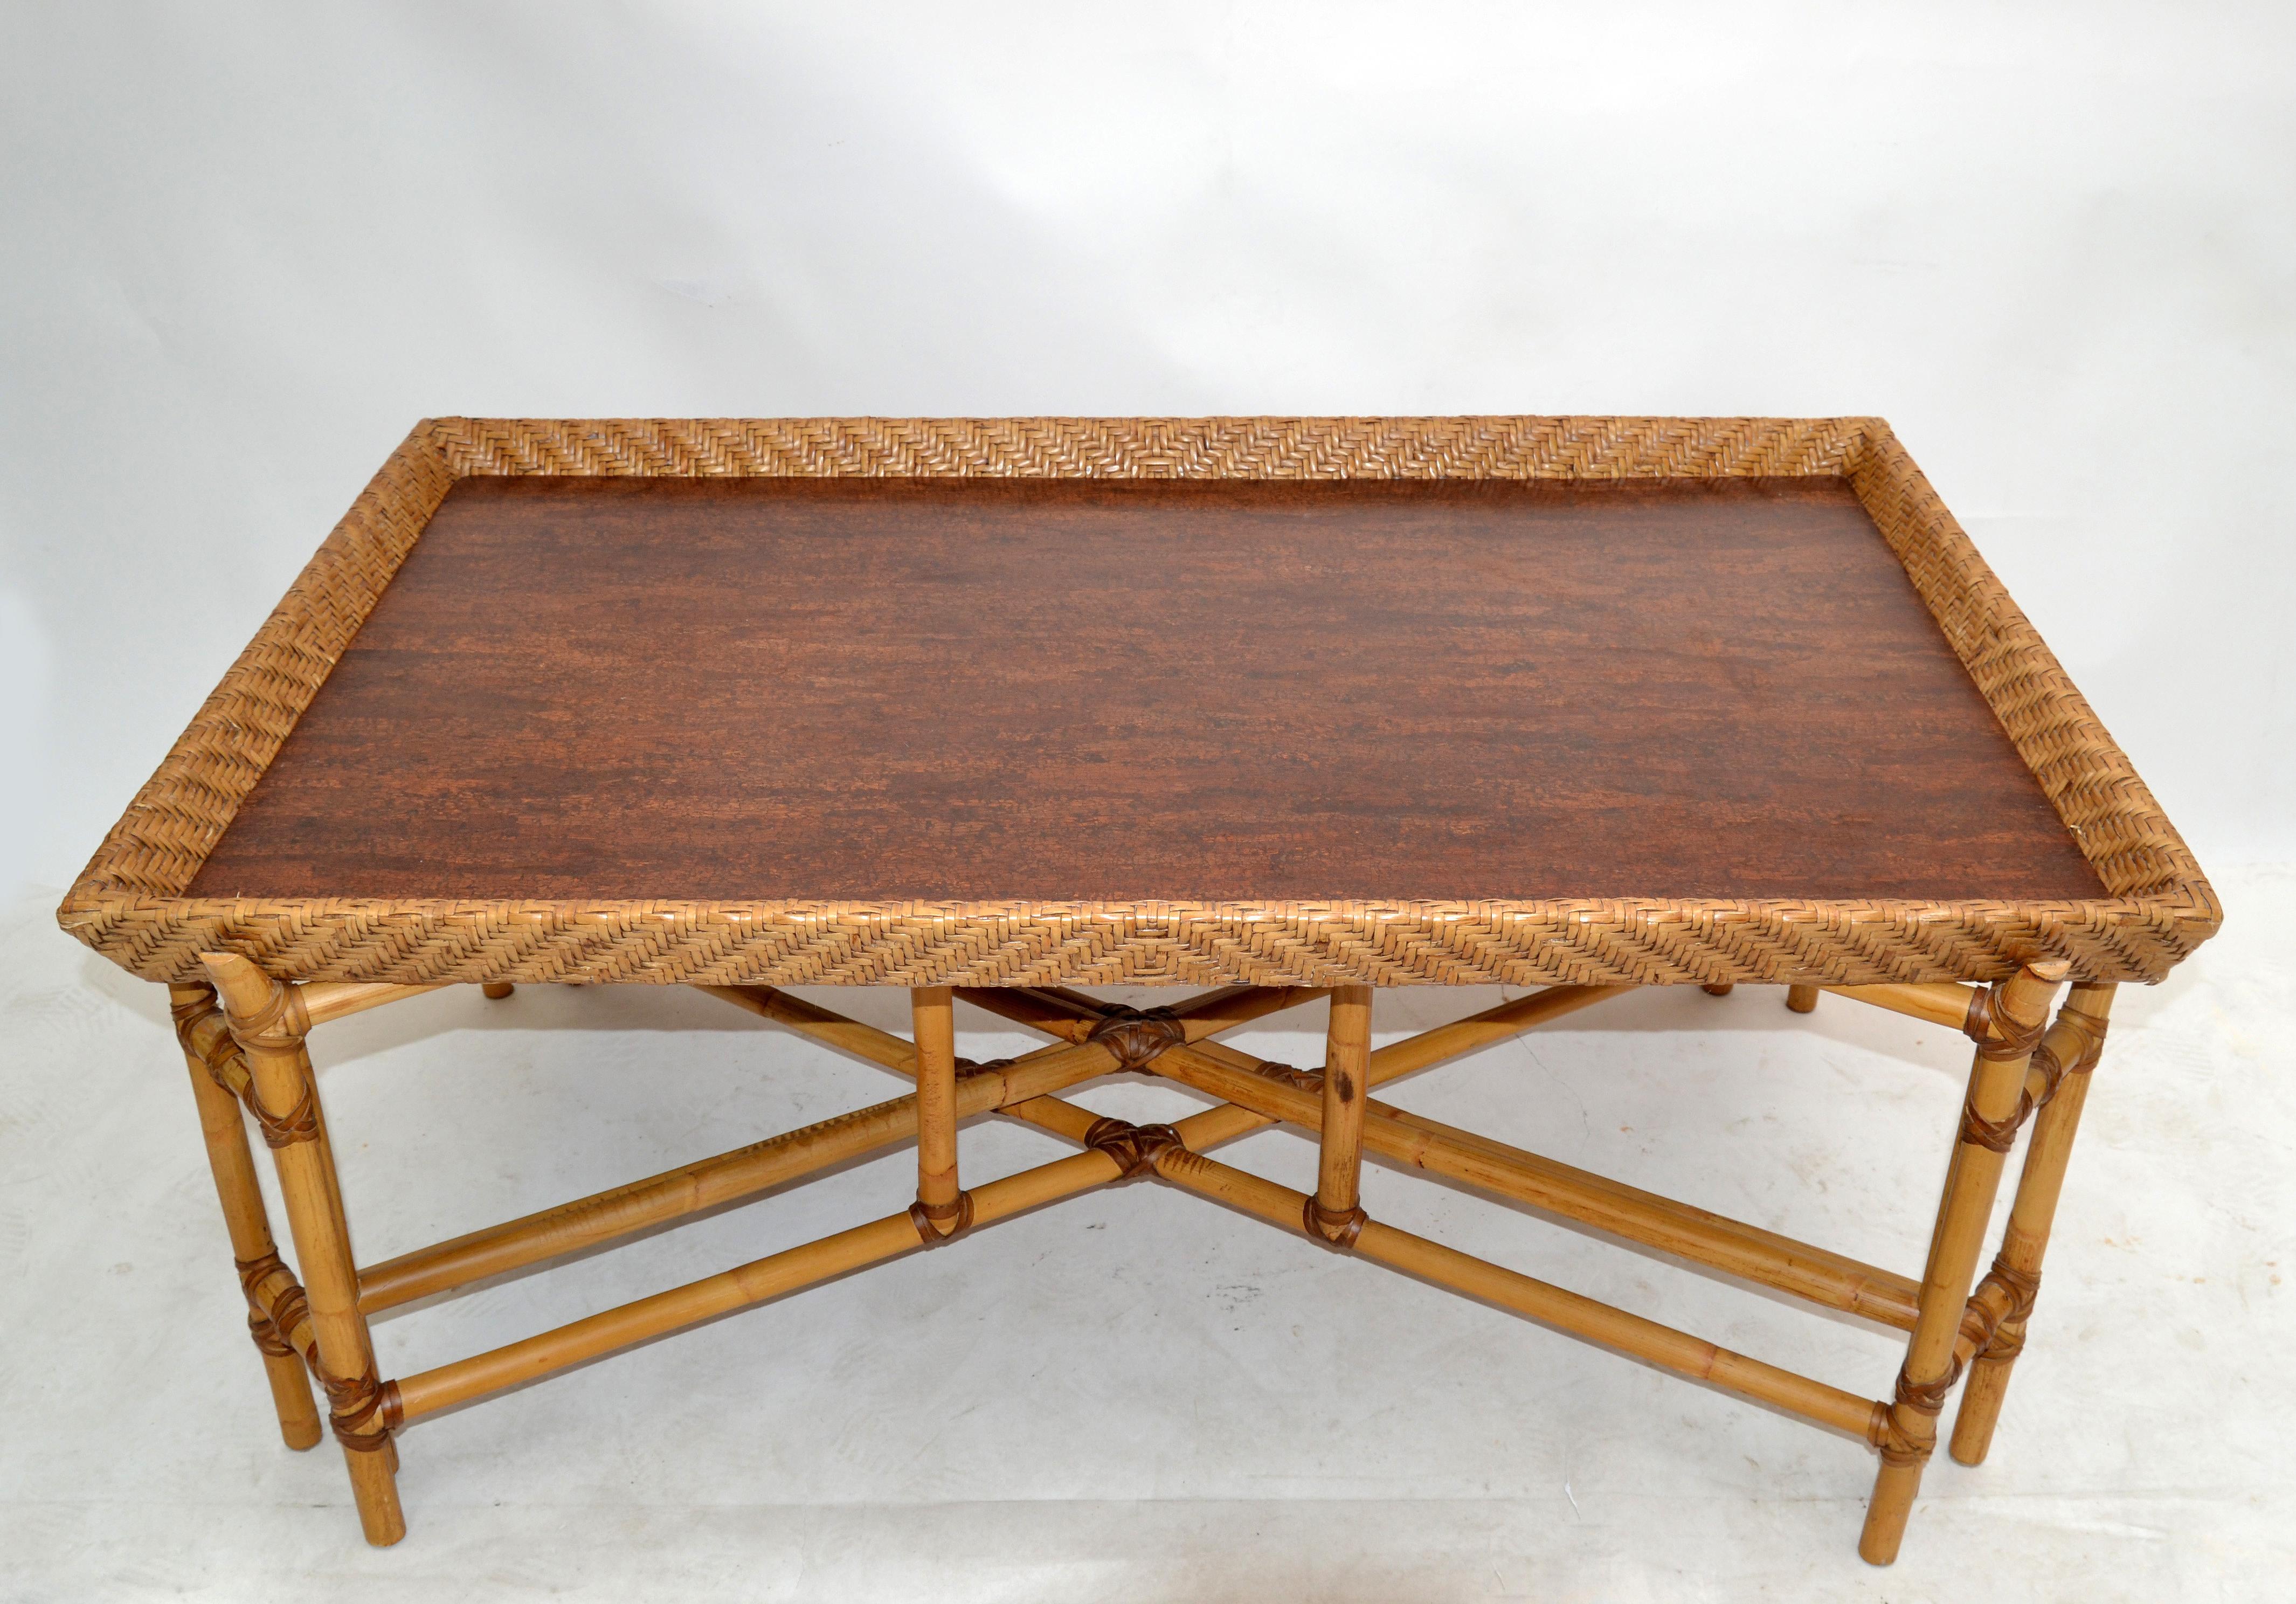 McGuire style traditional tray coffee table Mid-Century Modern in light bamboo, woven with Leather bindings around the joints.
The top is a handmade tray woven with cane and bamboo boards and sits perfect in the four corners.
Impressive, durable